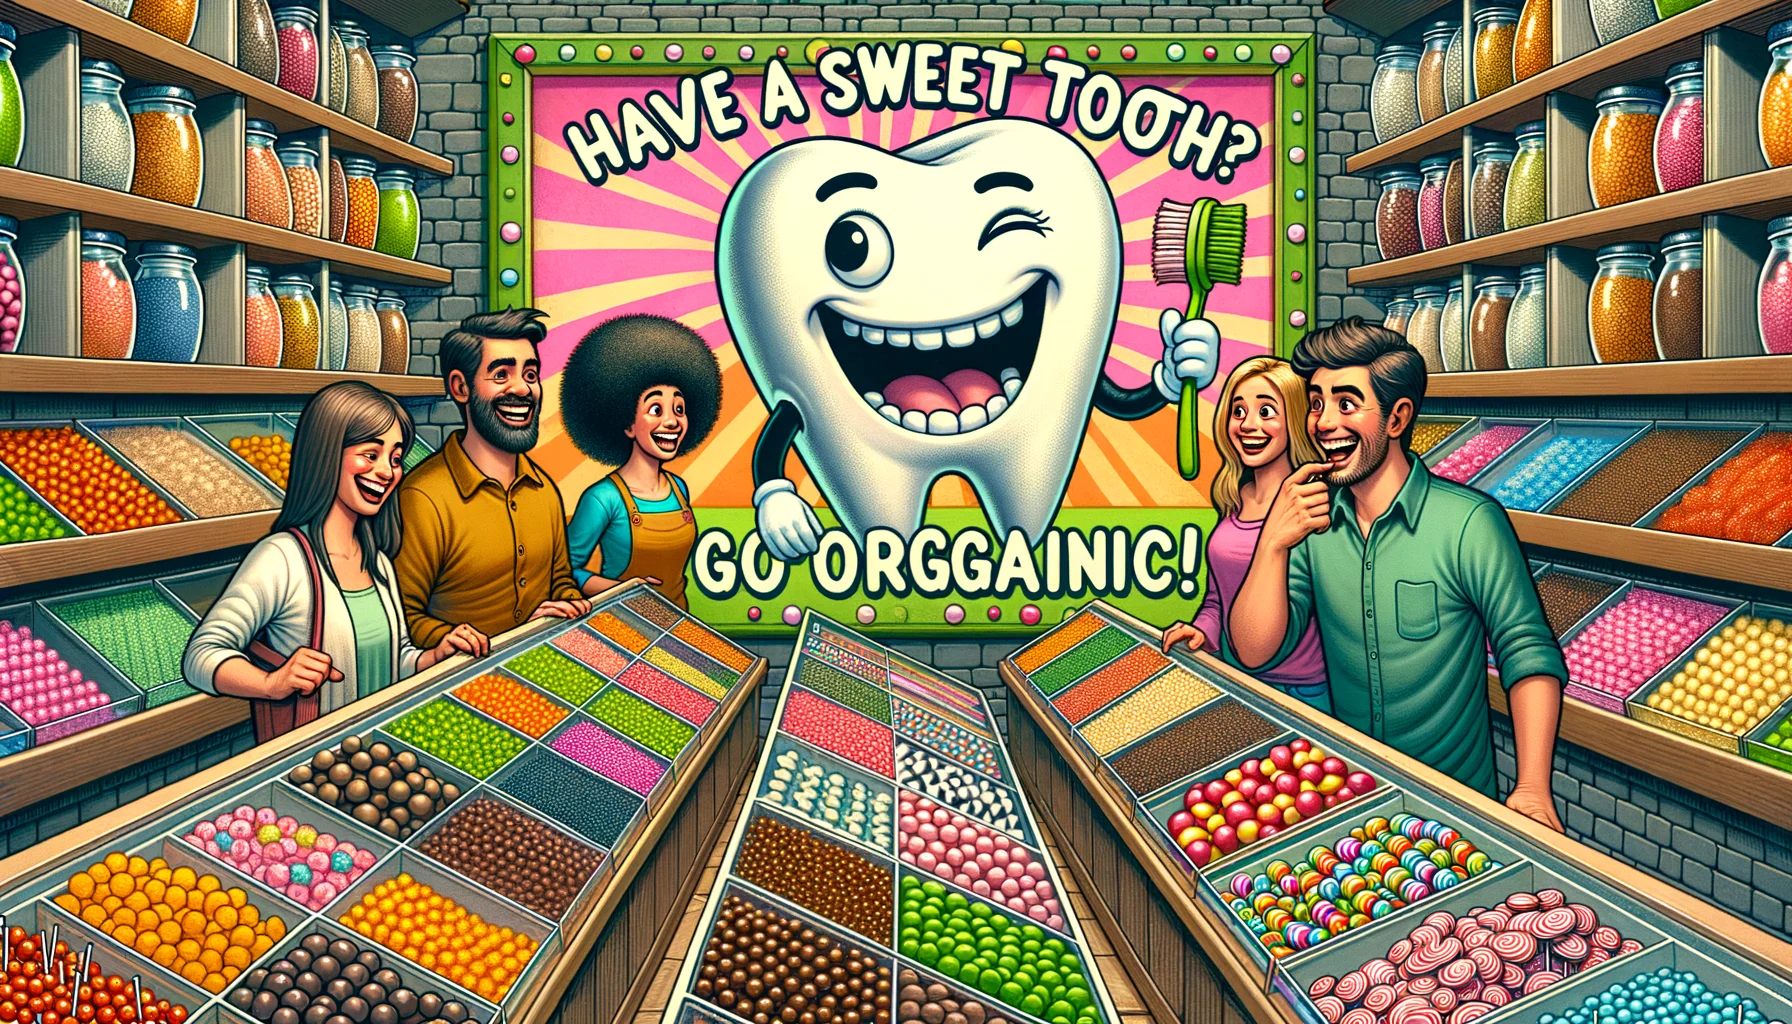 Create a lively candy shop, filled wall to wall with a variety of organic sweets. Picture a colorful kaleidoscope of lollipops, candied fruits, sugar-free gummies and organic chocolate lined beautifully on glass shelves, all labeled 'Organic Sweets for Health-Conscious Consumers'. Customers, a South-Asian man, a Caucasian woman, and a Middle-Eastern child, all laughing and jovial, are selecting their treats. In the center, a large amusing sign hangs with the wording 'Have a Sweet Tooth? Go Organic!' underlined by a goofy tooth character, holding a toothbrush and giving a cheeky wink.